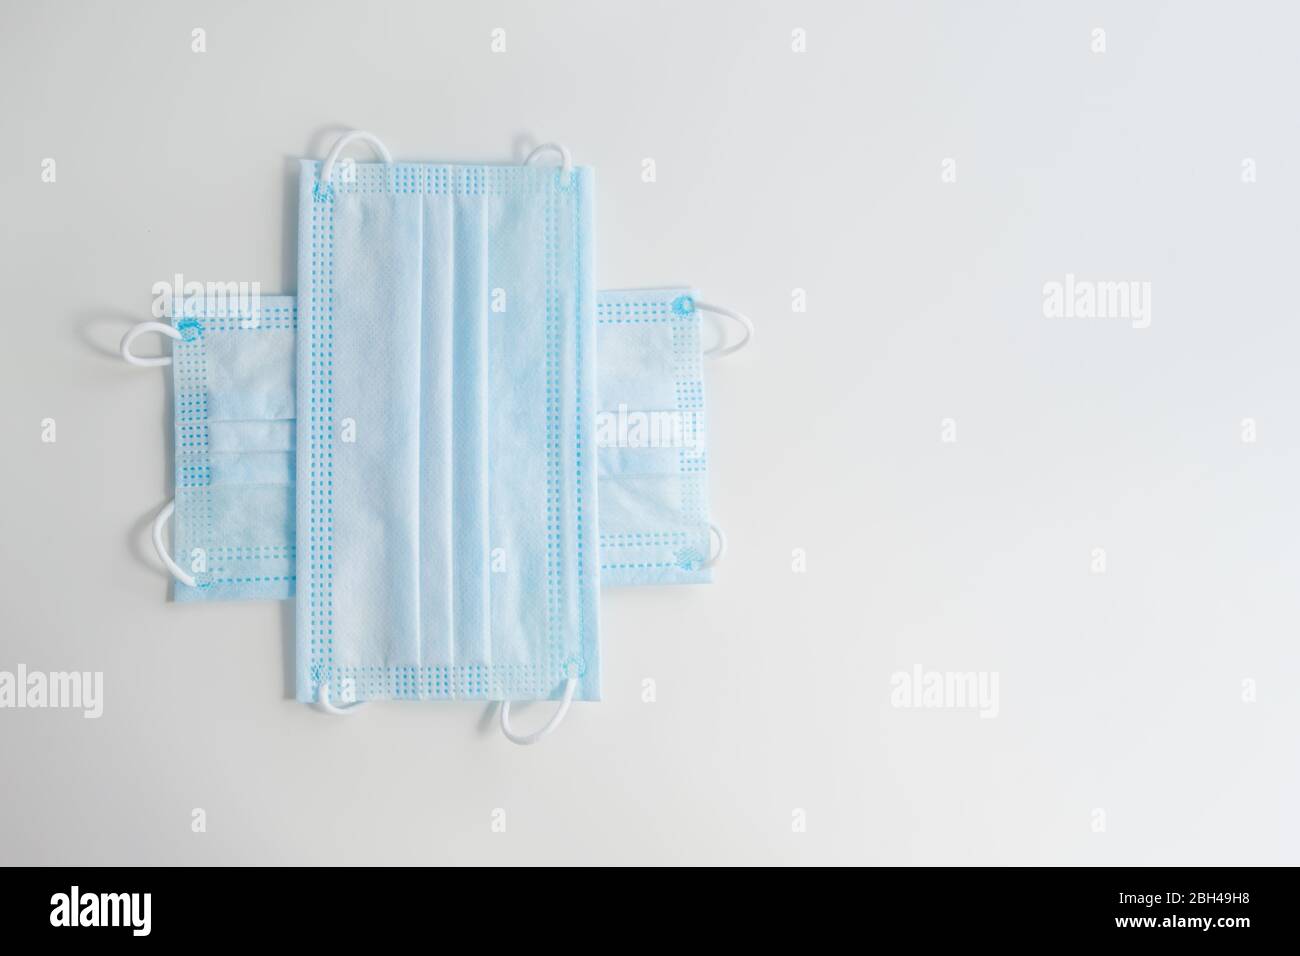 The cross of blue medical protective face masks with copy space for text. Protection measures against coronavirus concept. Stock Photo